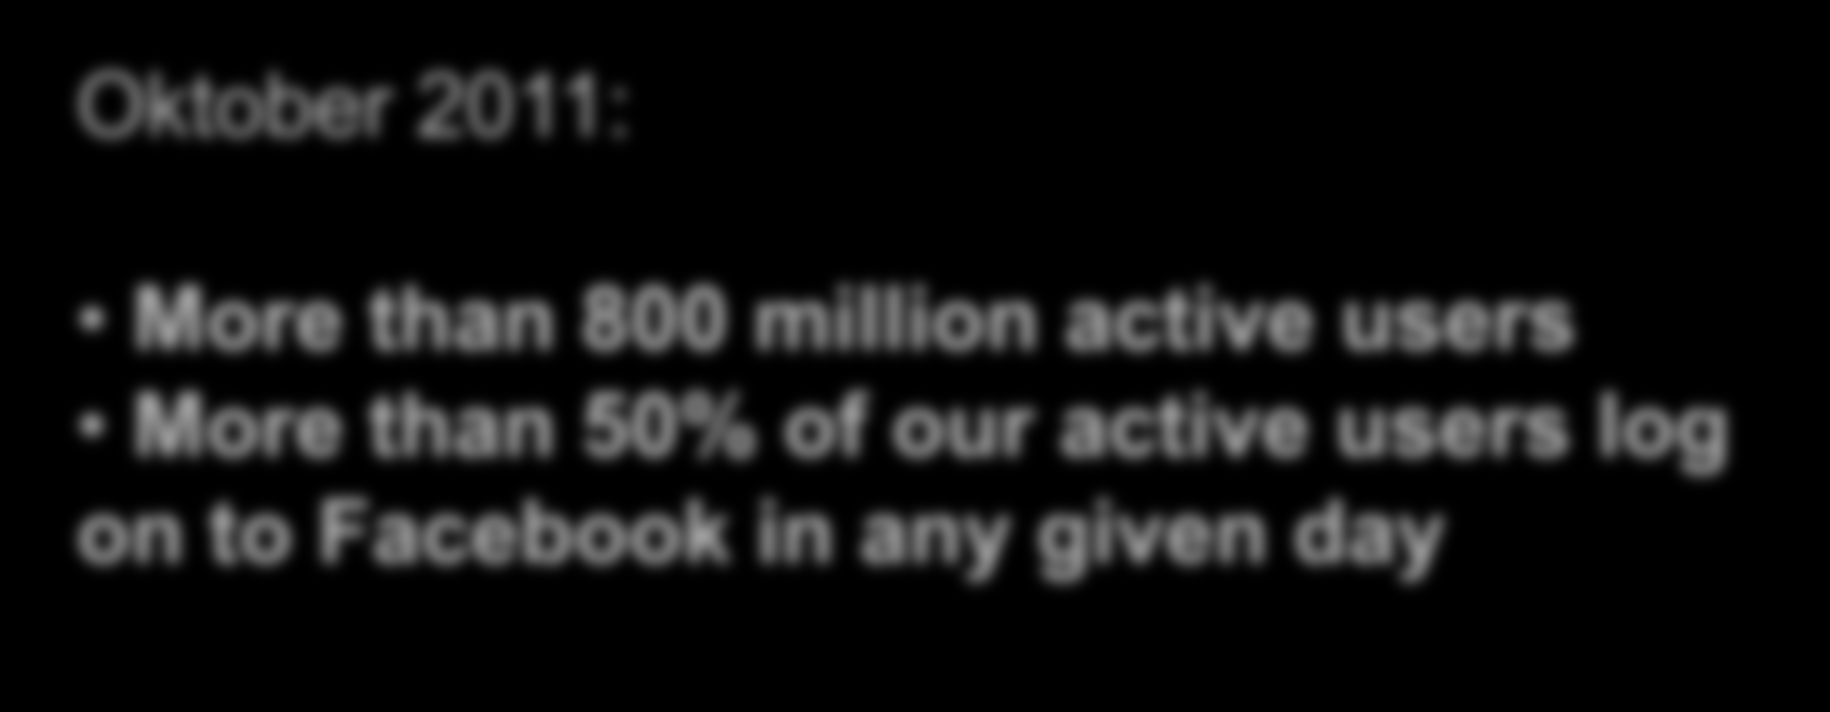 Oktober 2011: More than 800 million active users More than 50% of our